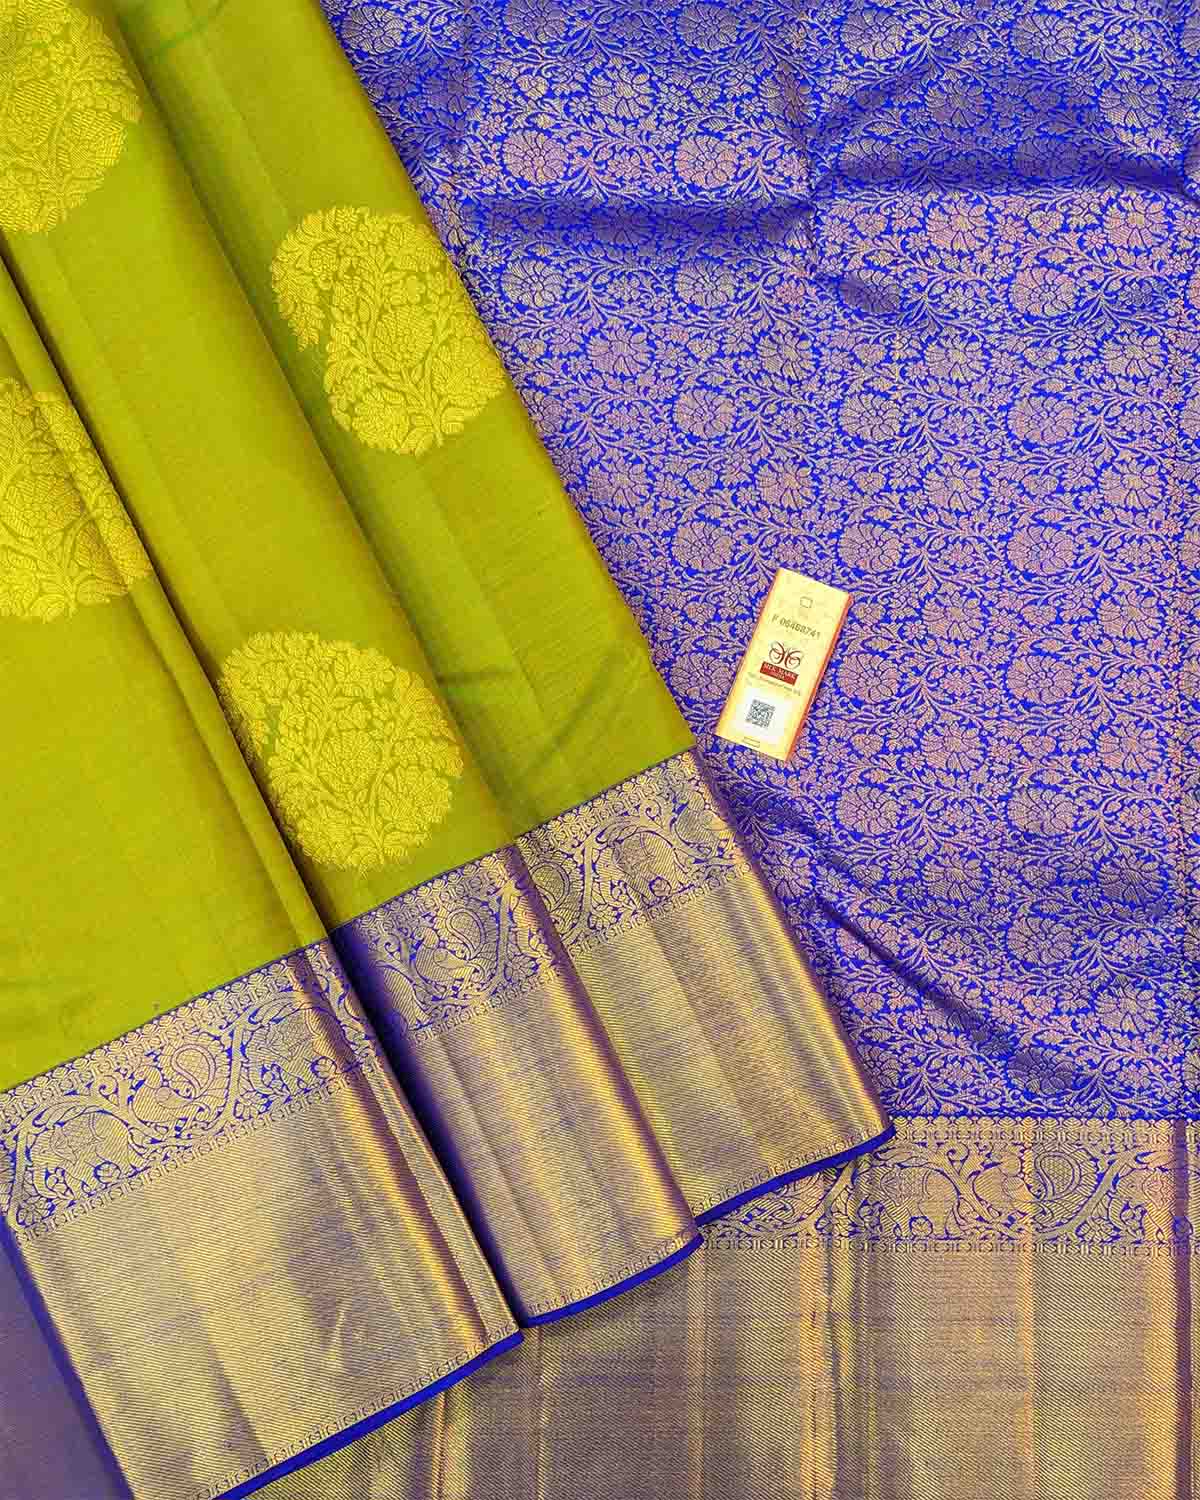 Exquisite Saree with Annam-Elephant Border and Floral Buttas